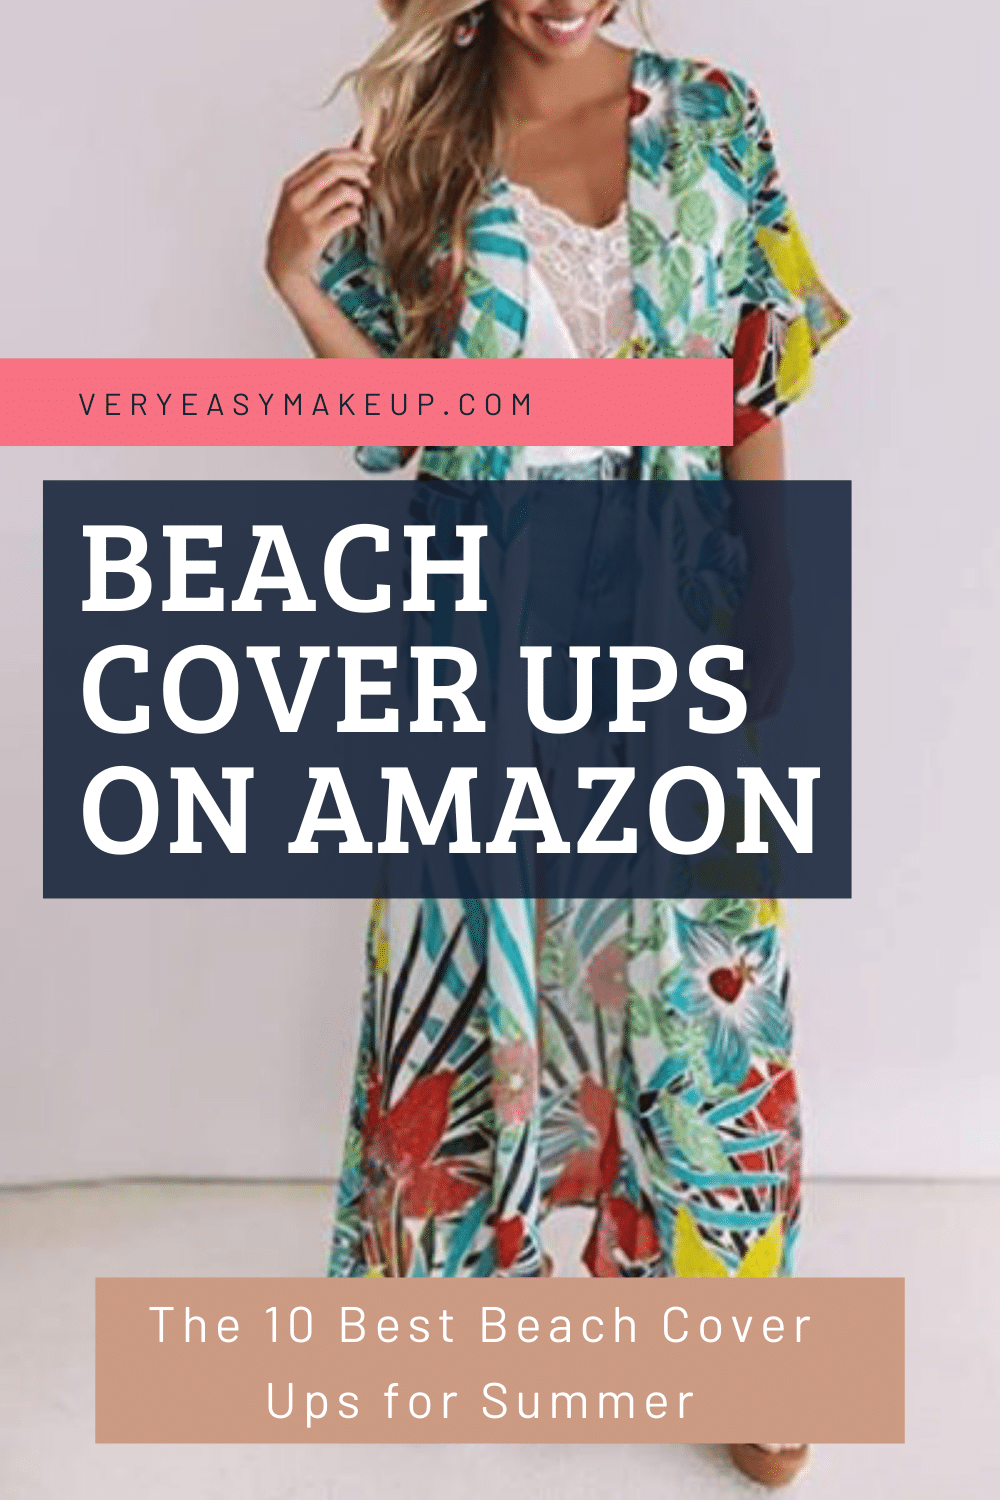 The Best Beach Cover Ups on Amazon by Very Easy Makeup